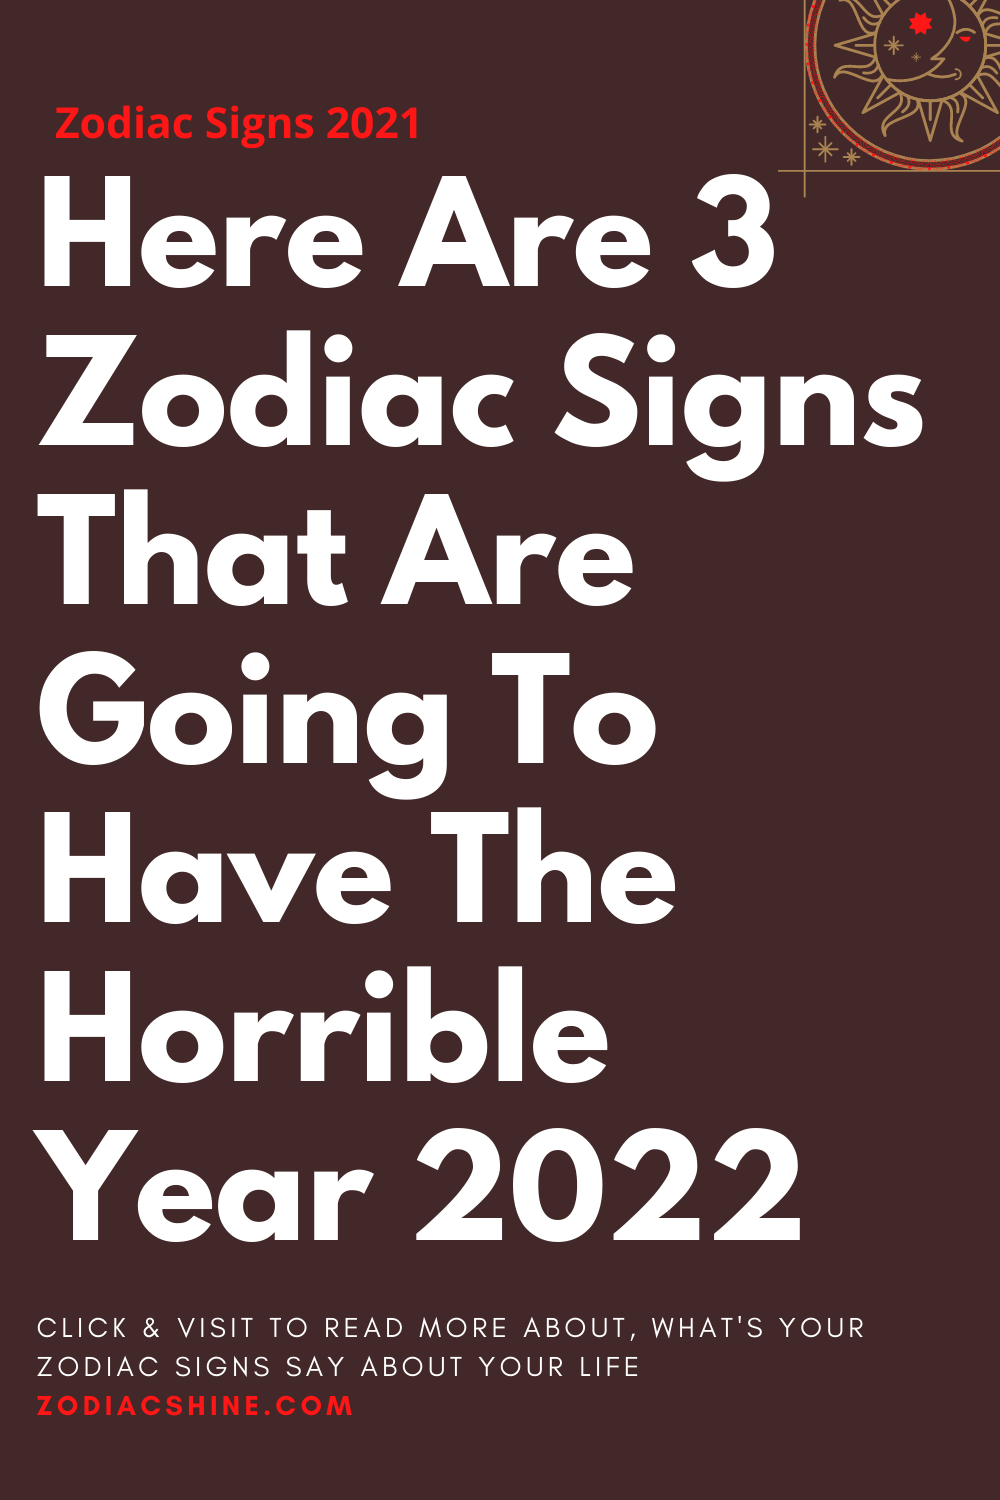 Here Are 3 Zodiac Signs That Are Going To Have The Horrible Year 2022